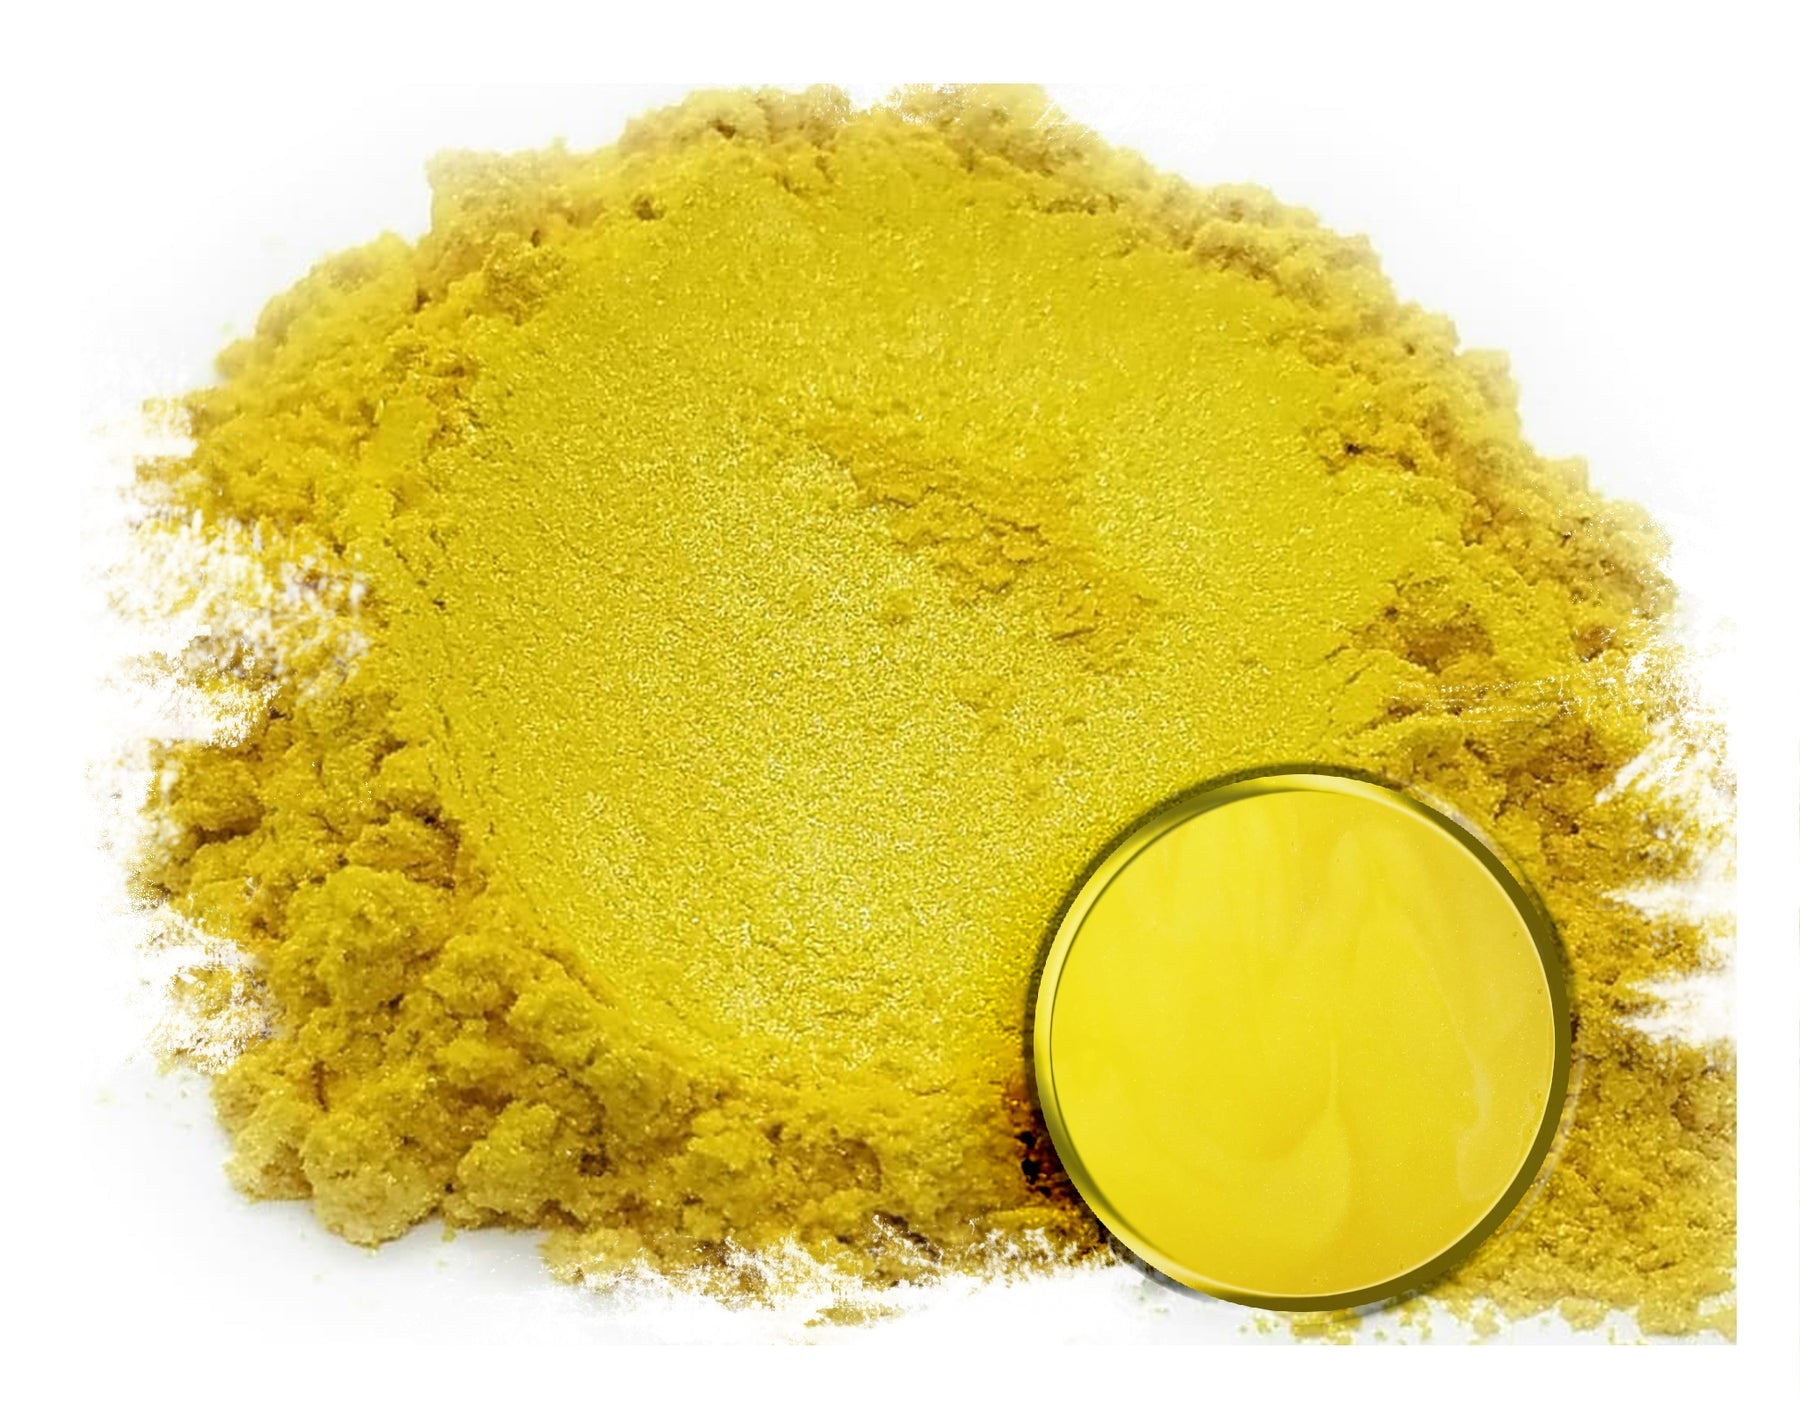 Powdered pigment by eye candy pigments for epoxy resin projects. In the color Shogun Yellow.